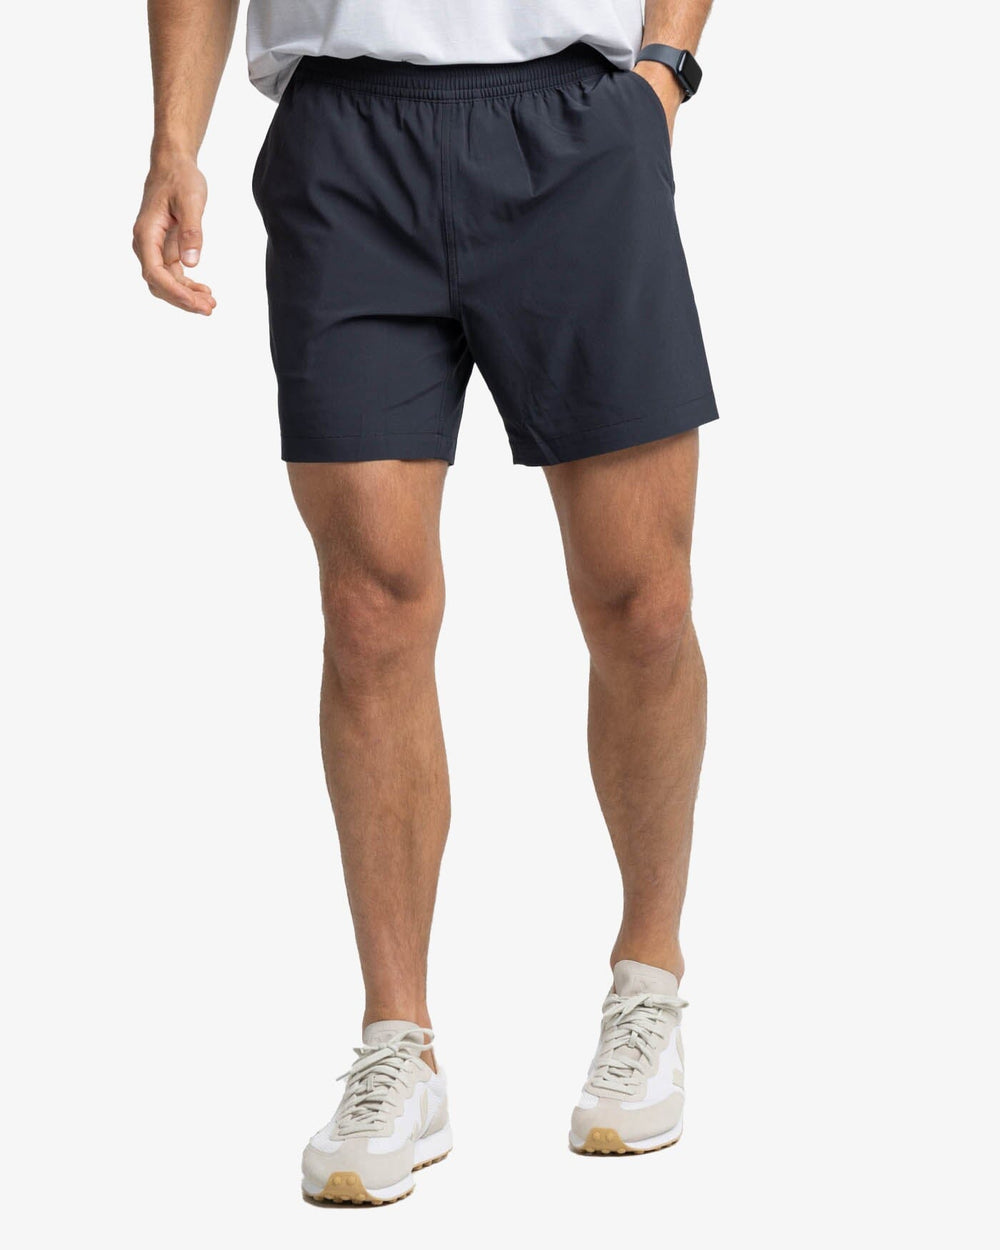 Men's 6 Inch Active Short with Liner | Southern Tide